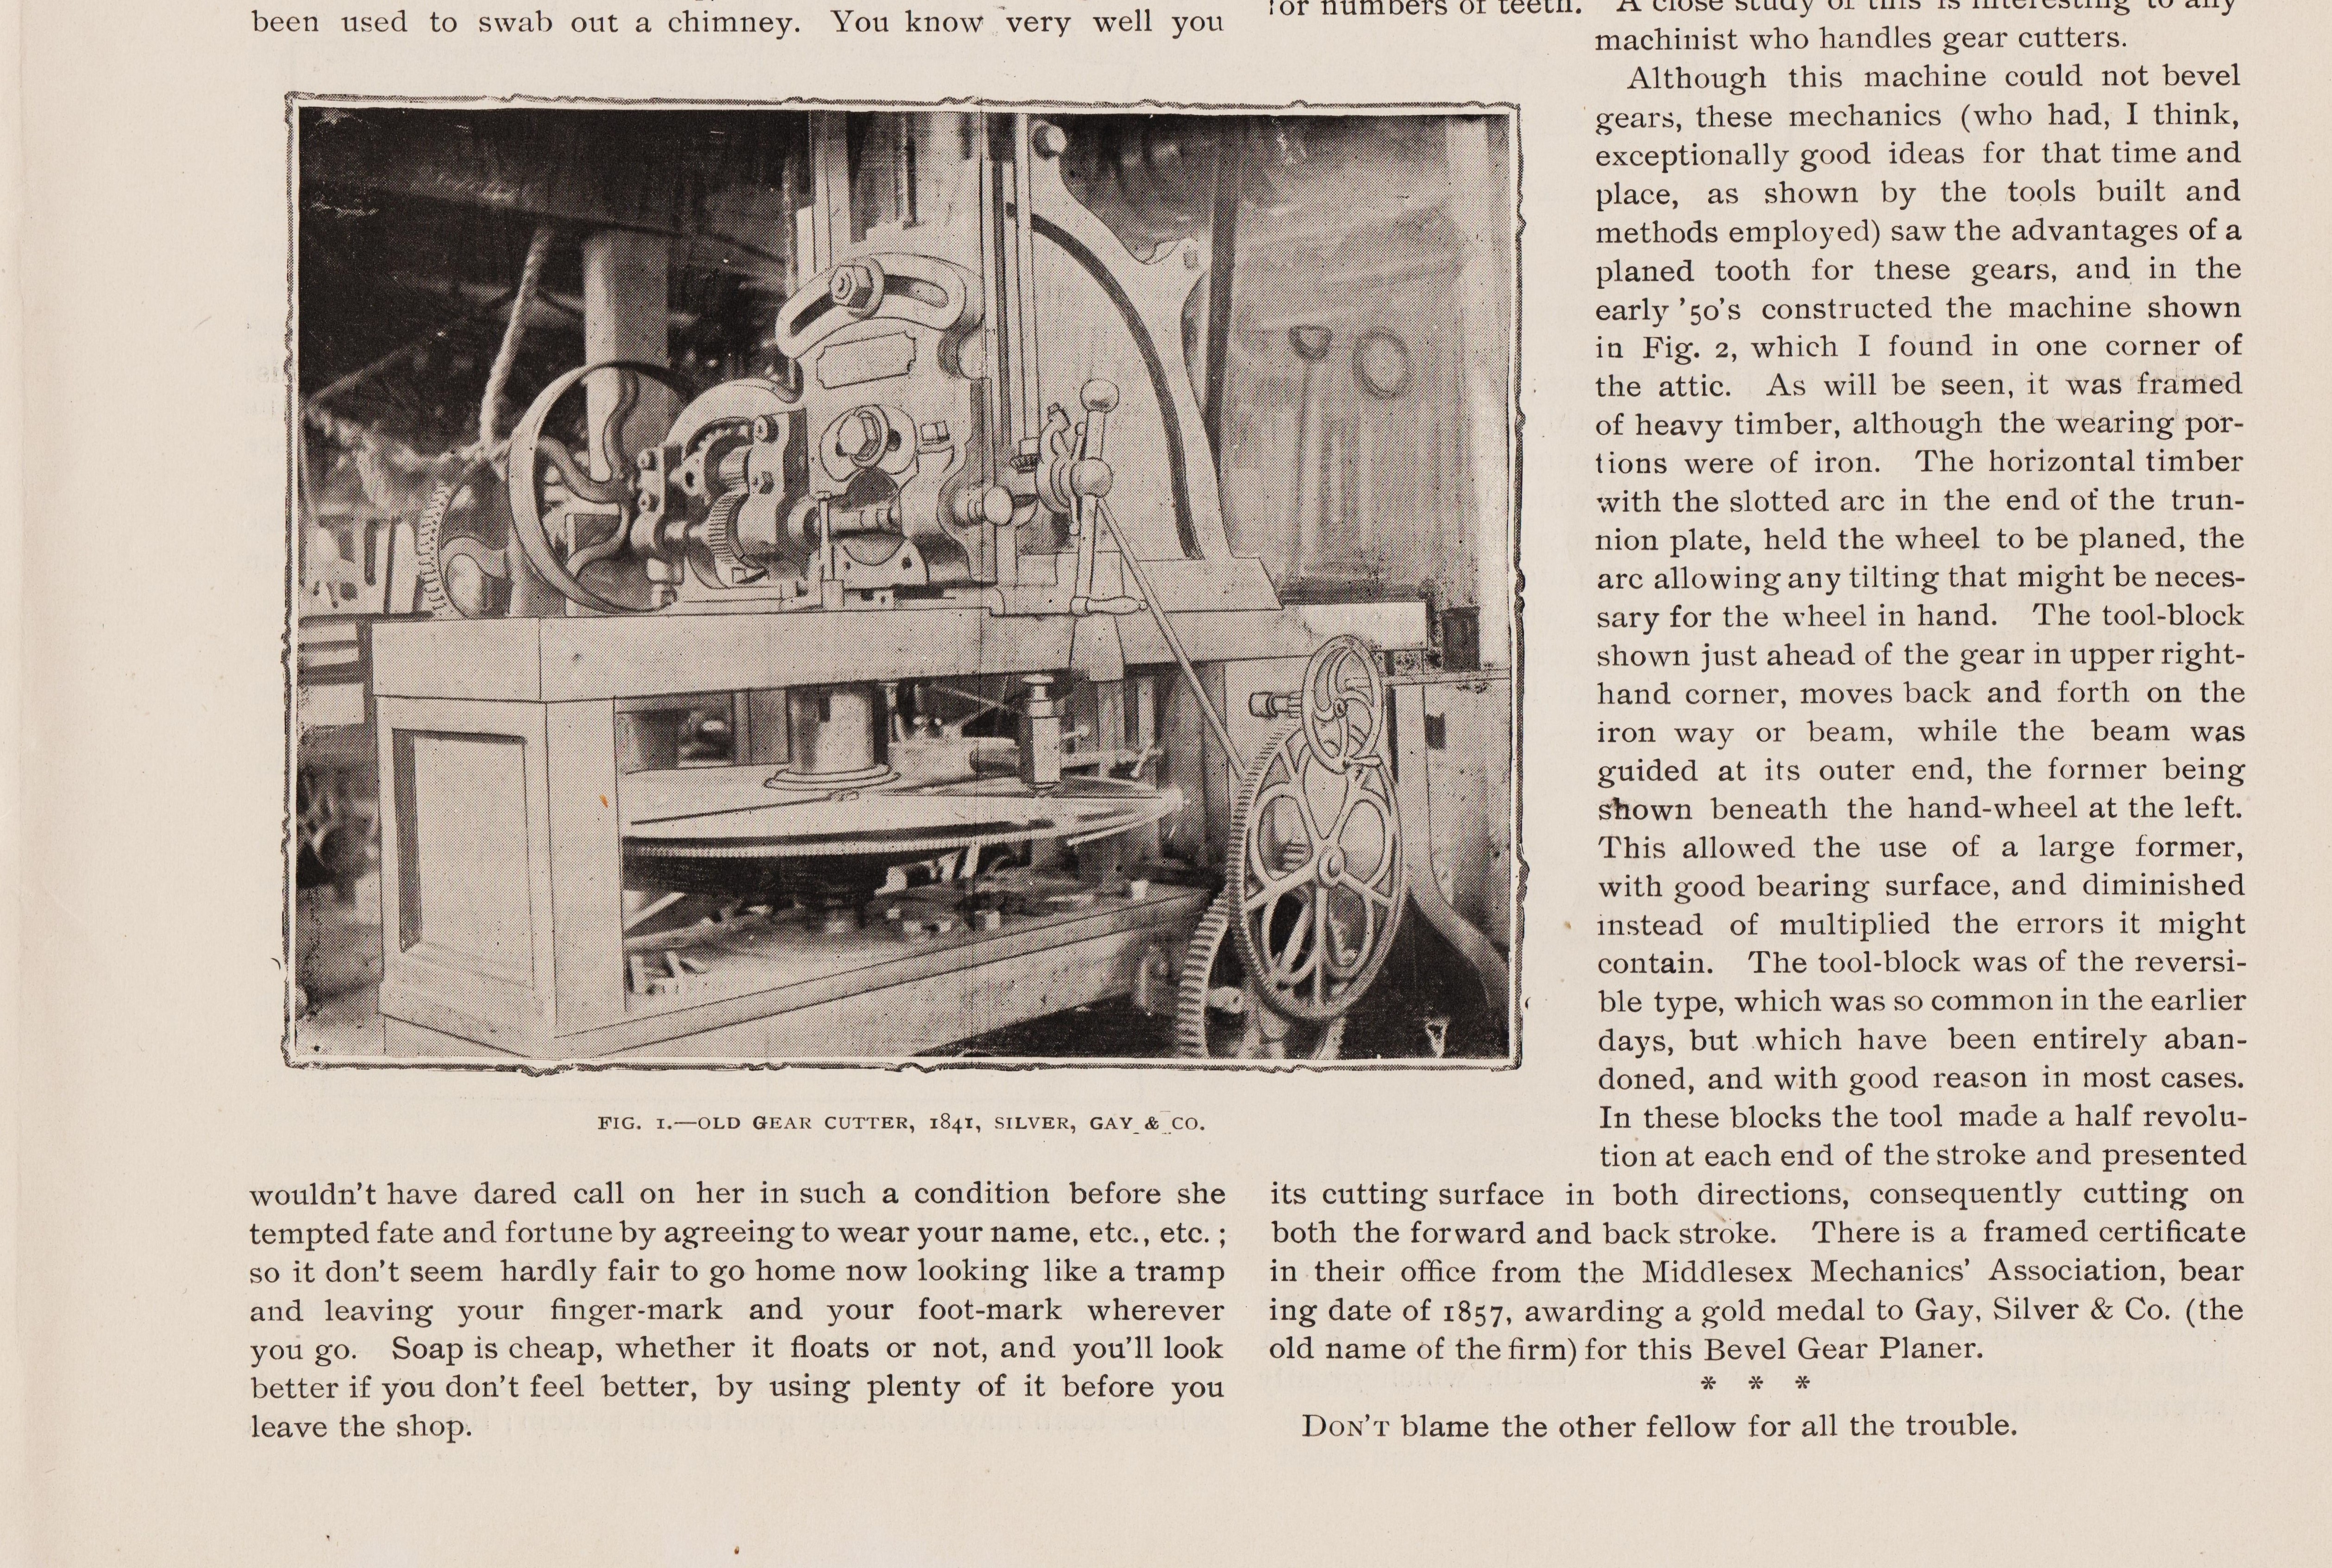 http://antiquemachinery.com/images-2019/American-Machinist-May-1896-vol-2-no-9-pg-285-bot-Two-Old-Gear-Cutter-Silver.jpg